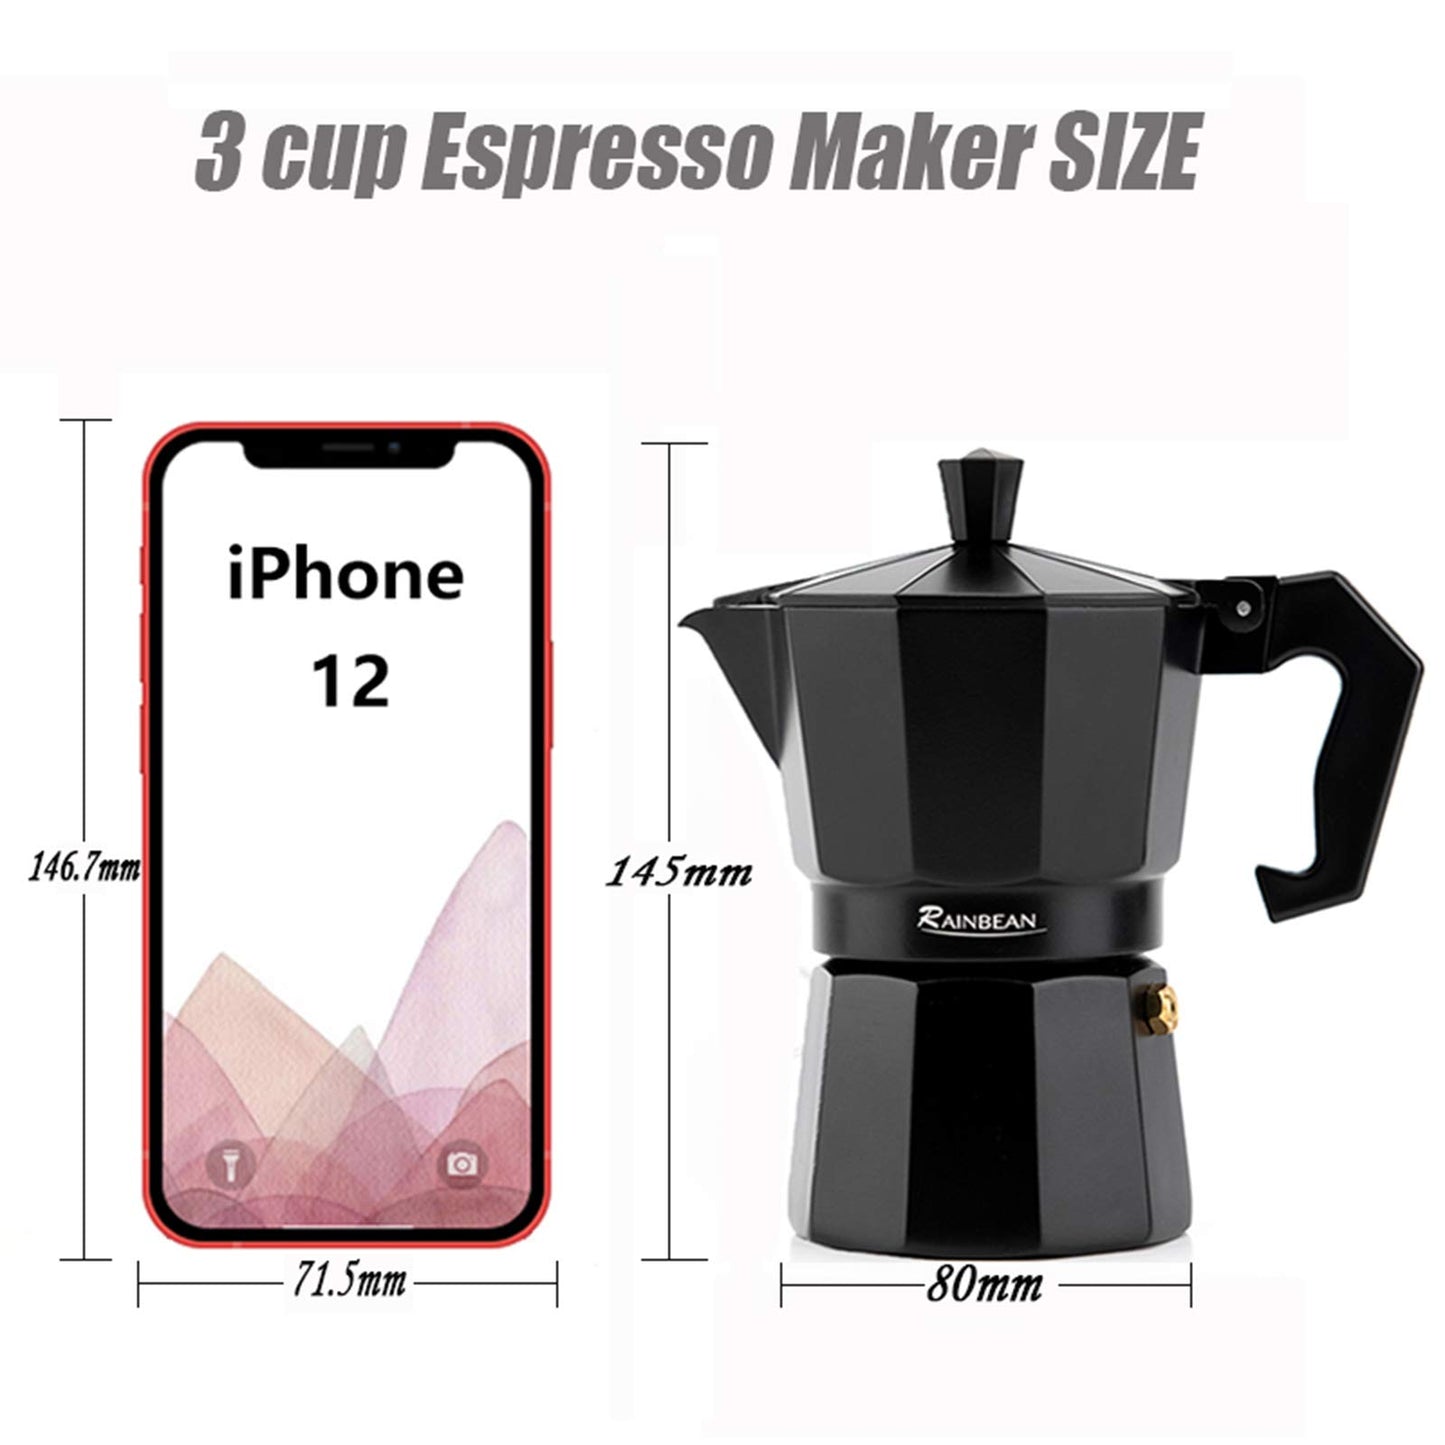 Stovetop Espresso Maker with 2 Cups Gift Set